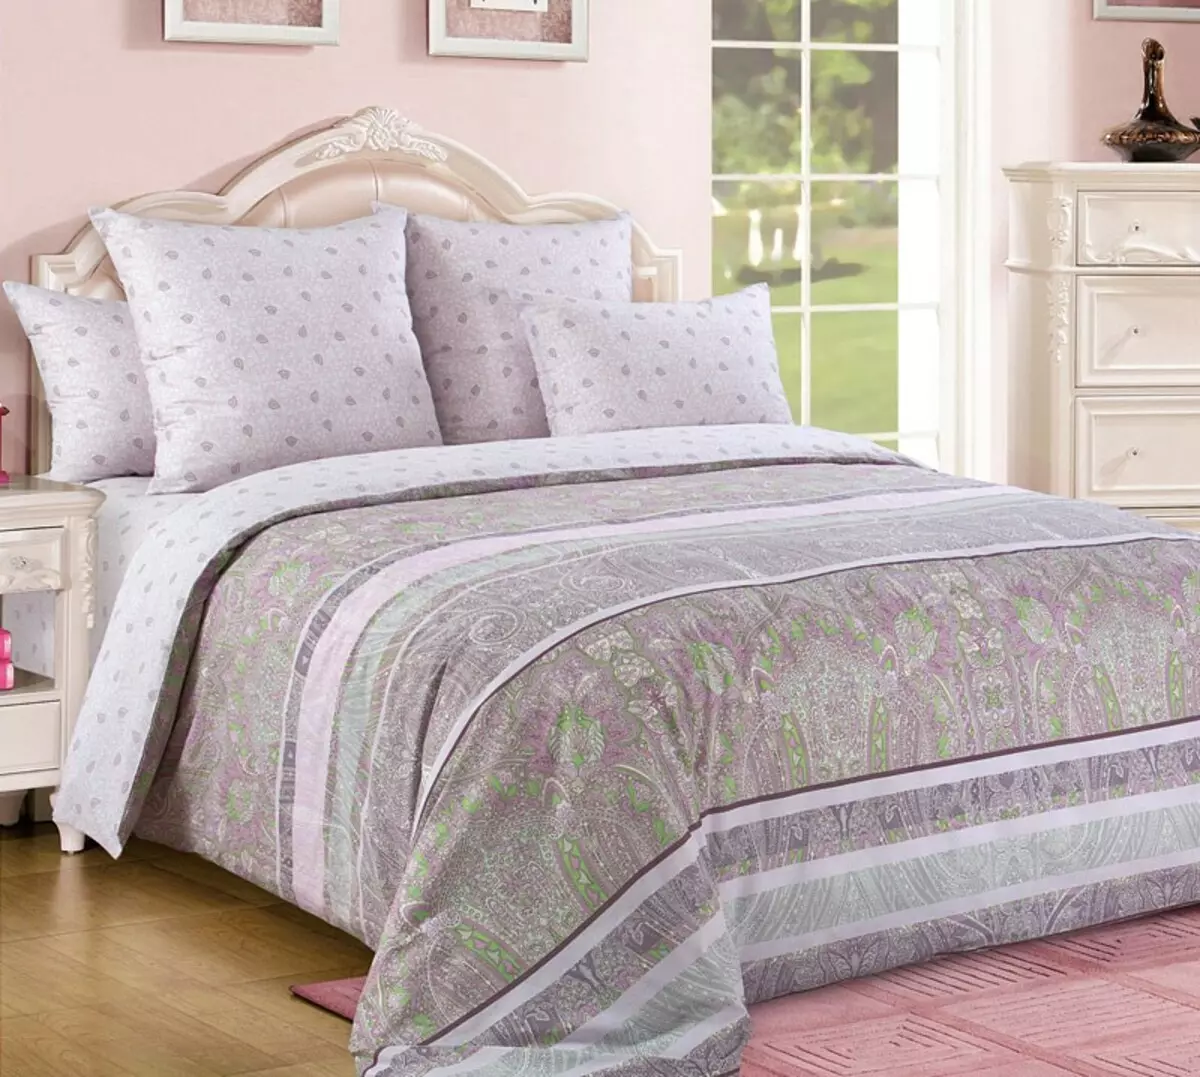 Bed linen O'Lelen: Overview of the range and features of bed linen, customer reviews 21261_2